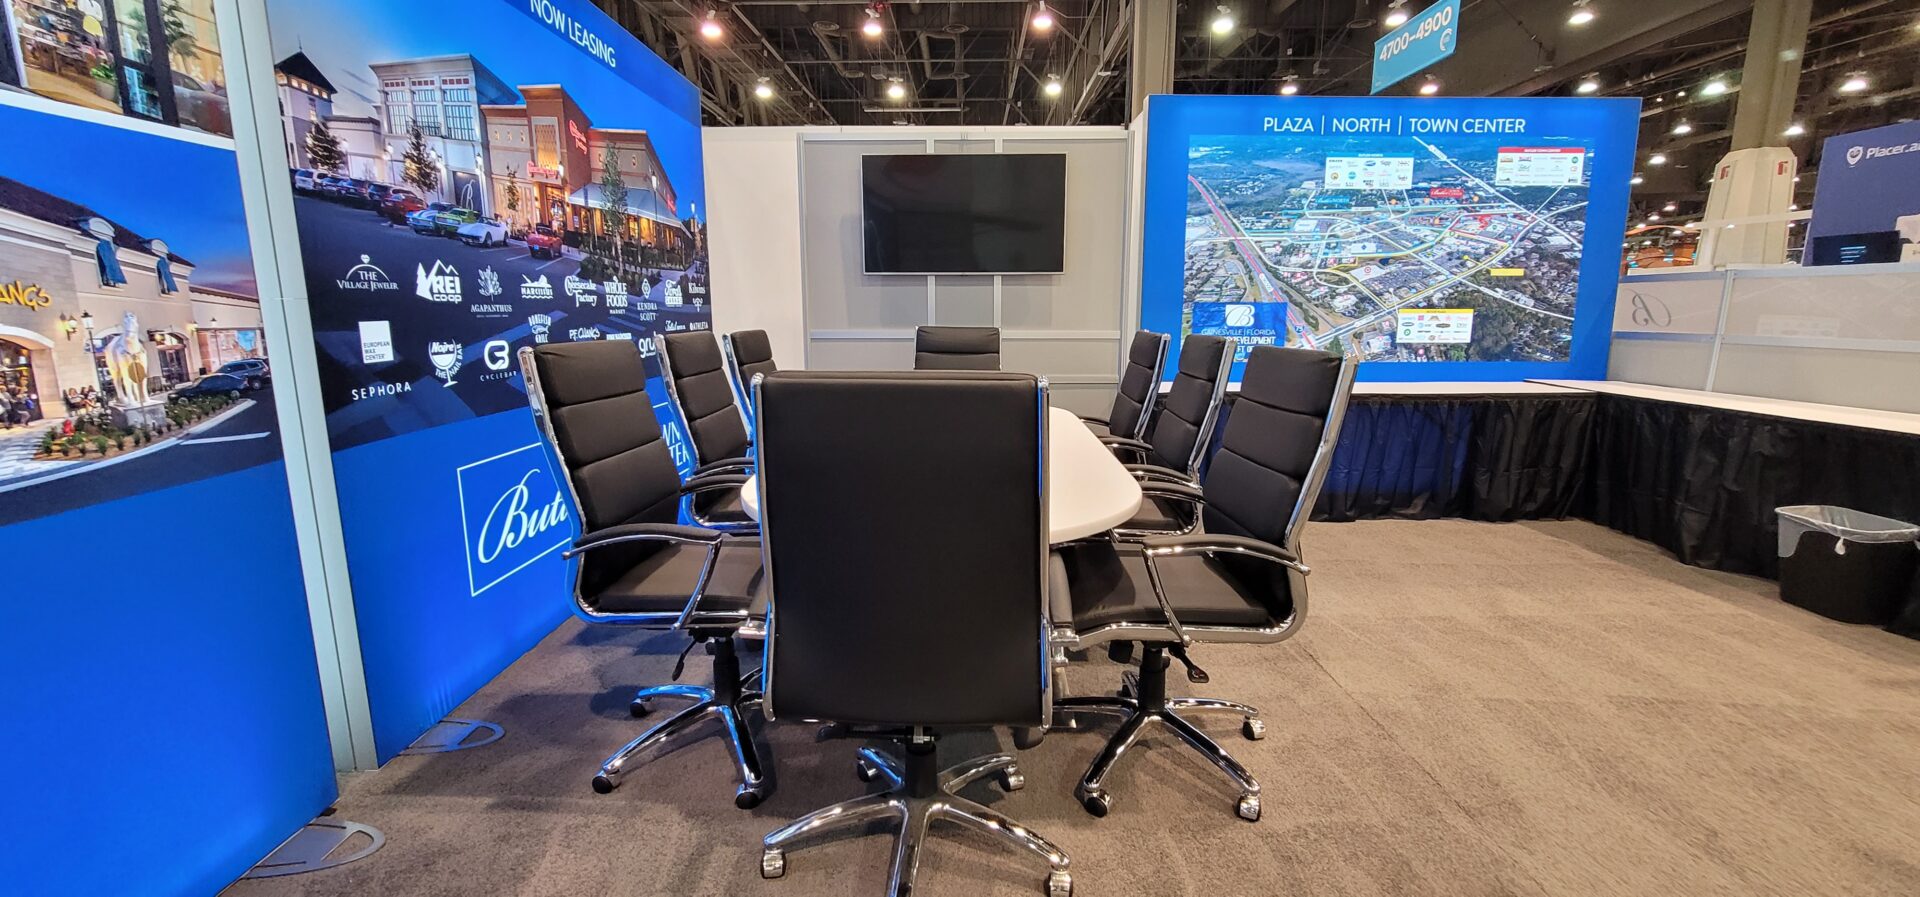 Office chairs and conference table for the event